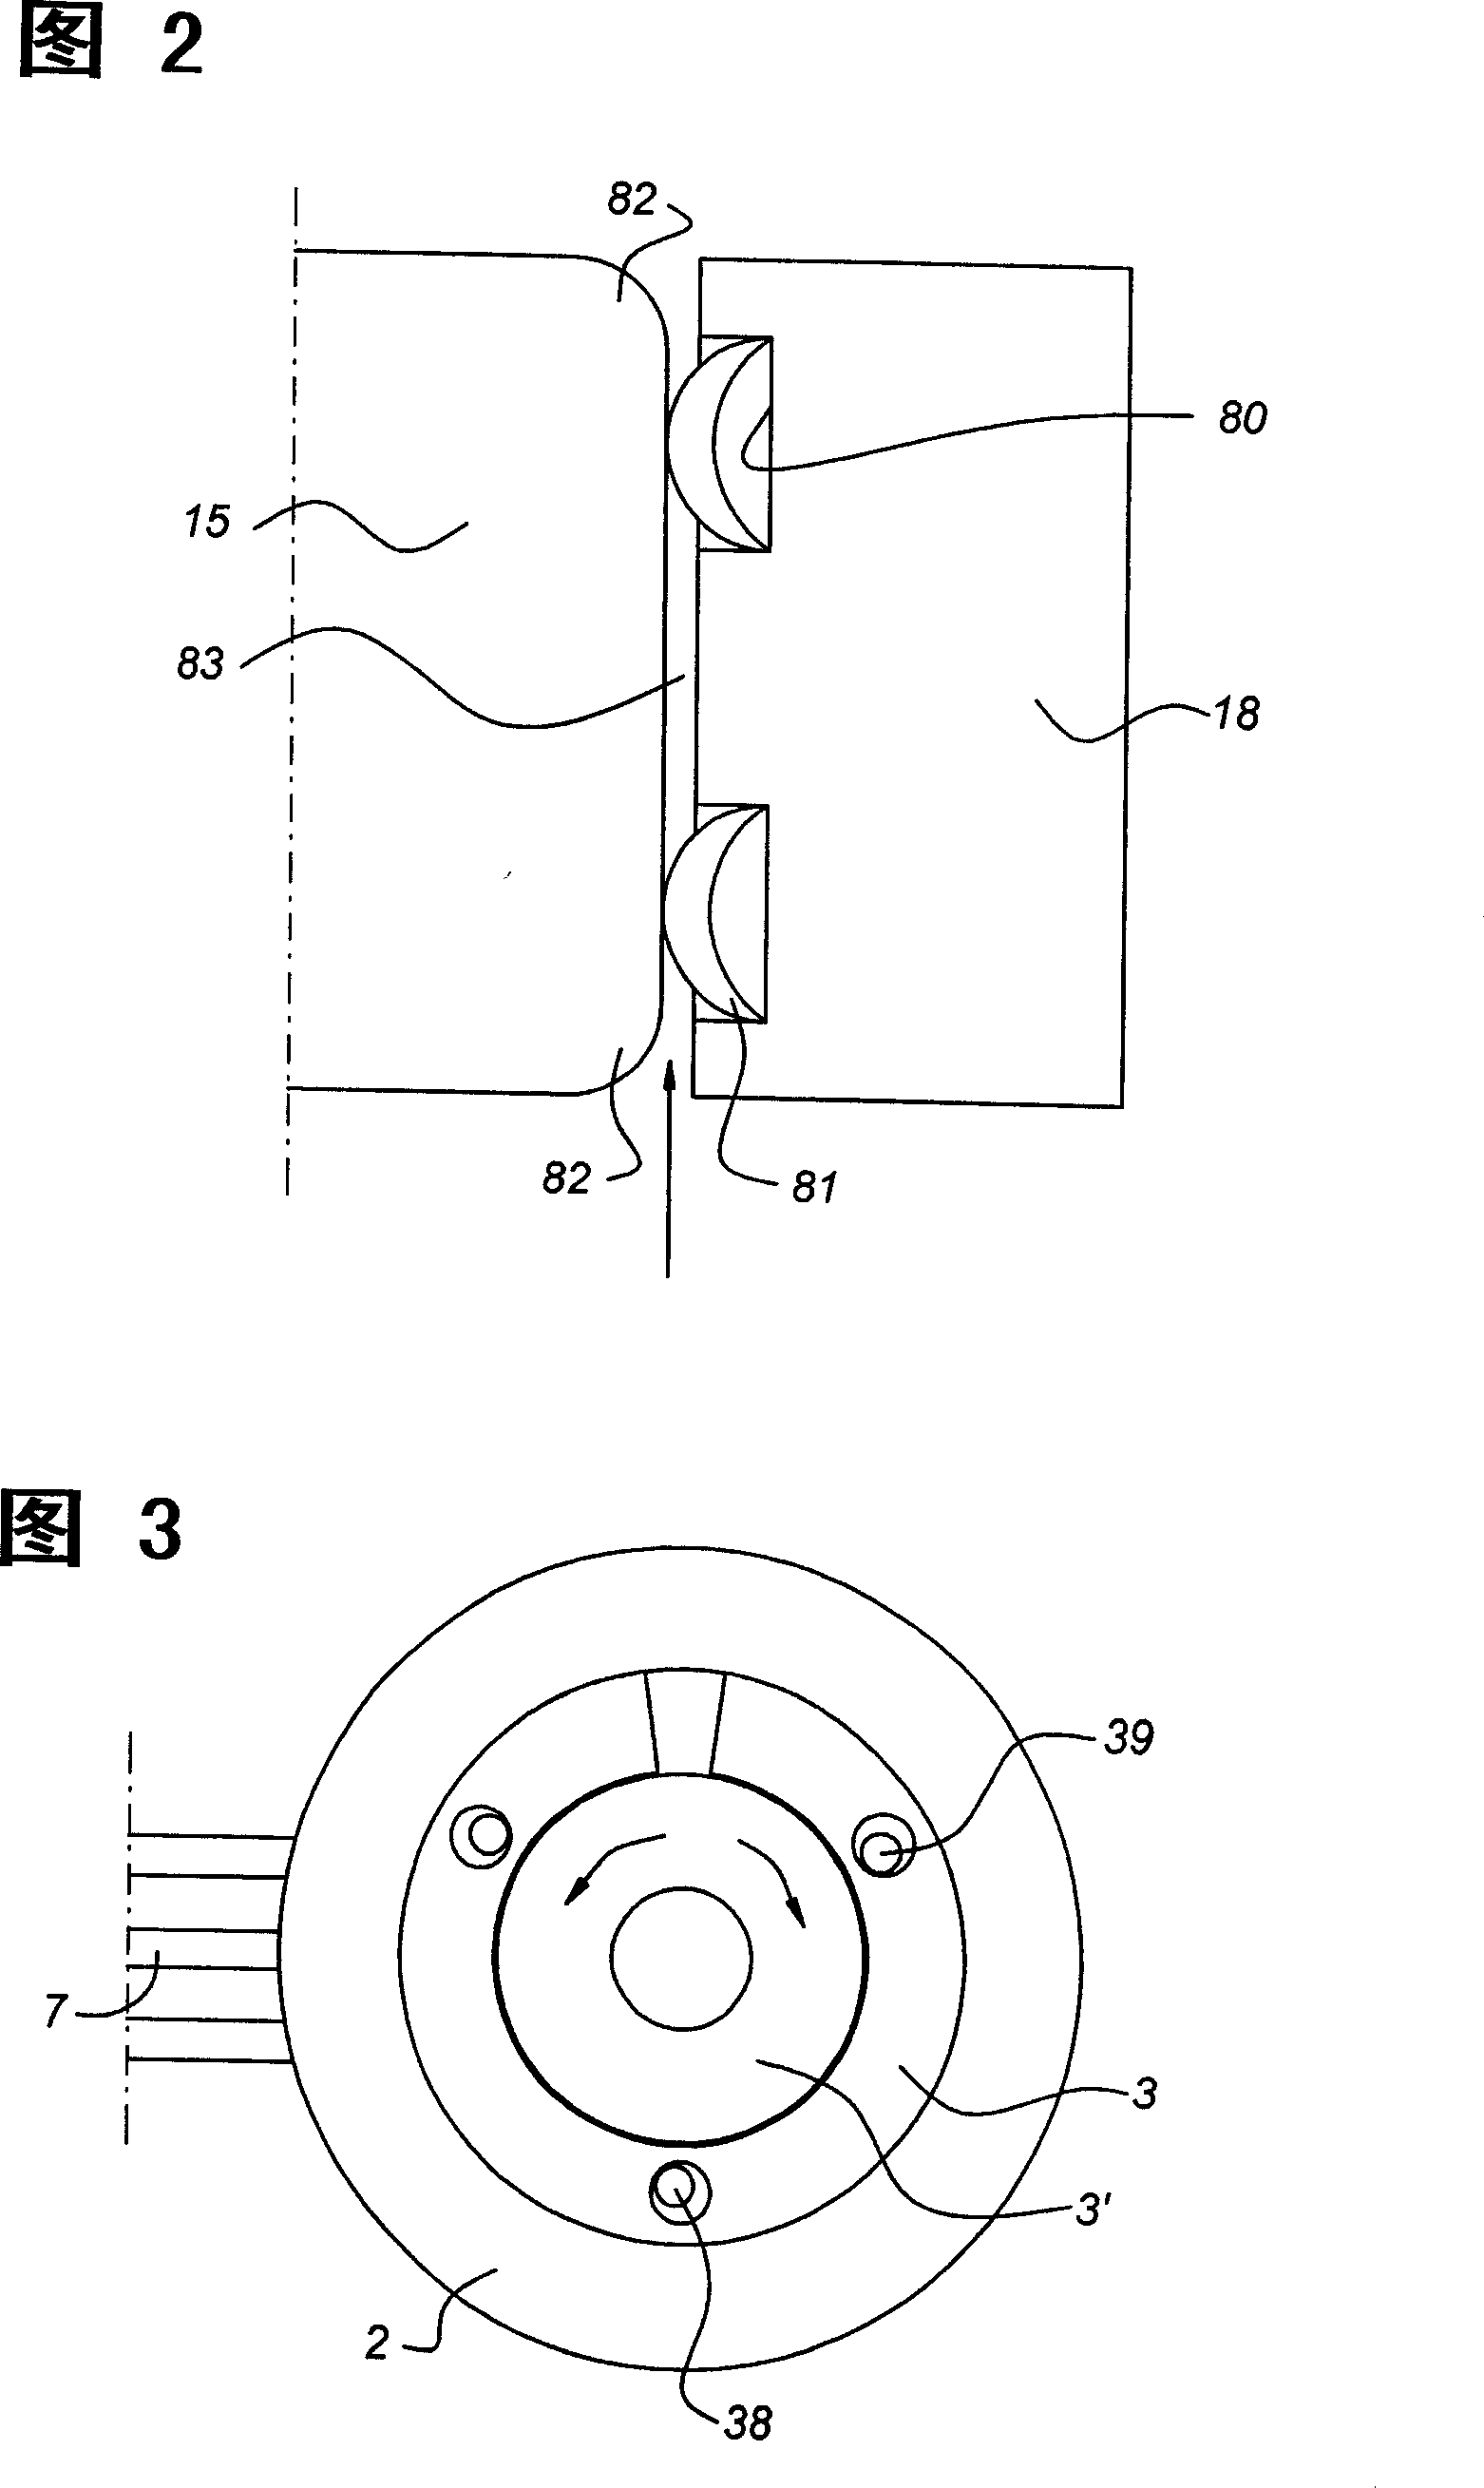 High pressure or middle pressure rotating connector